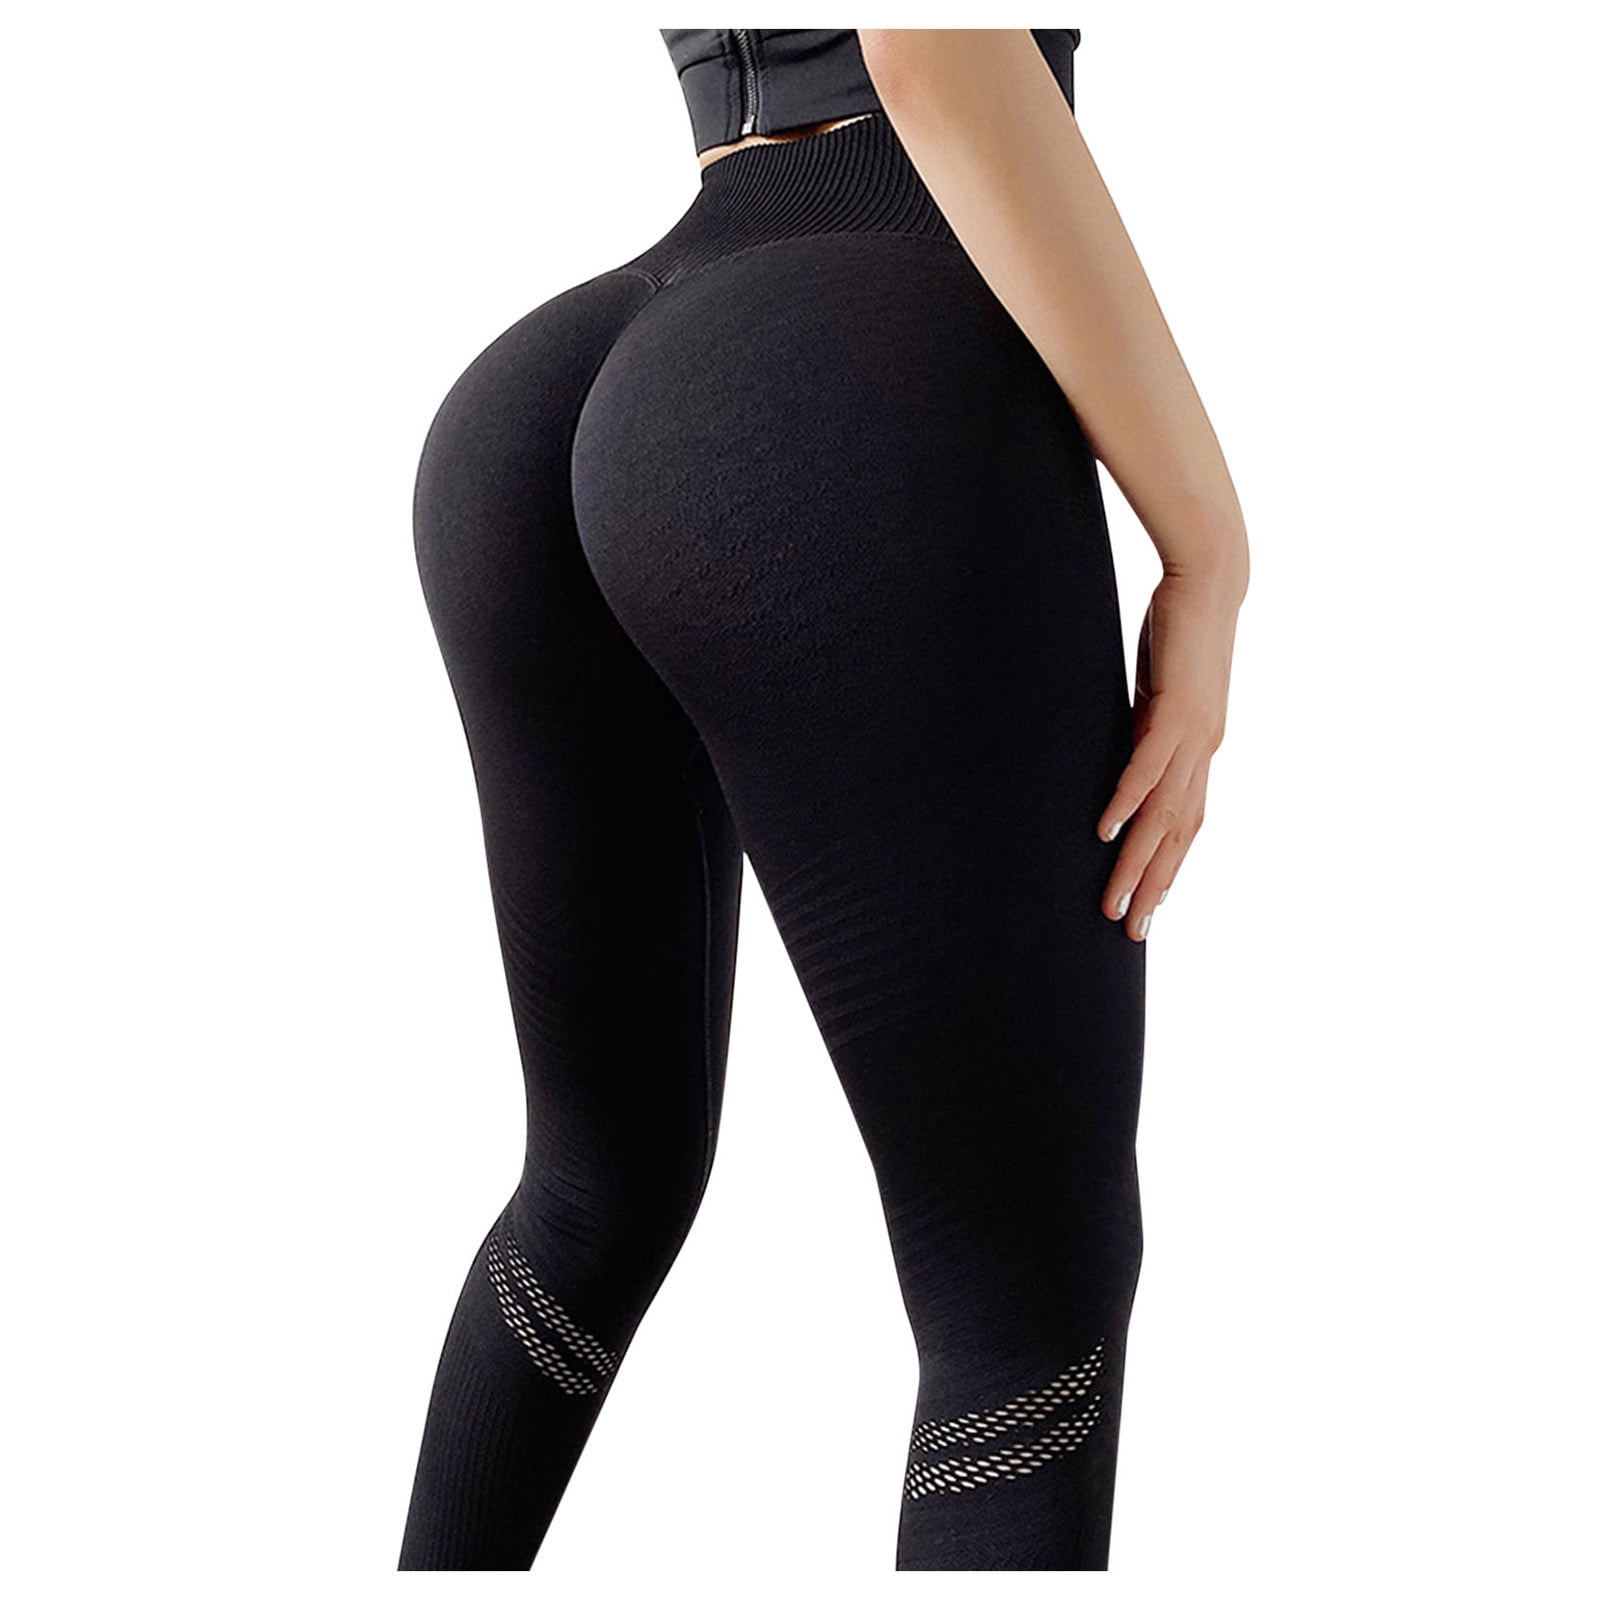 BYOIMUD Womens Yoga Pants for Women Sweatpants Tummy Control Fitness  Running Workout Pants Butt Lift Tights Workout Pants Stretch Athletic  Slimming High Waist Yoga Leggings for Women Black S - Walmart.com